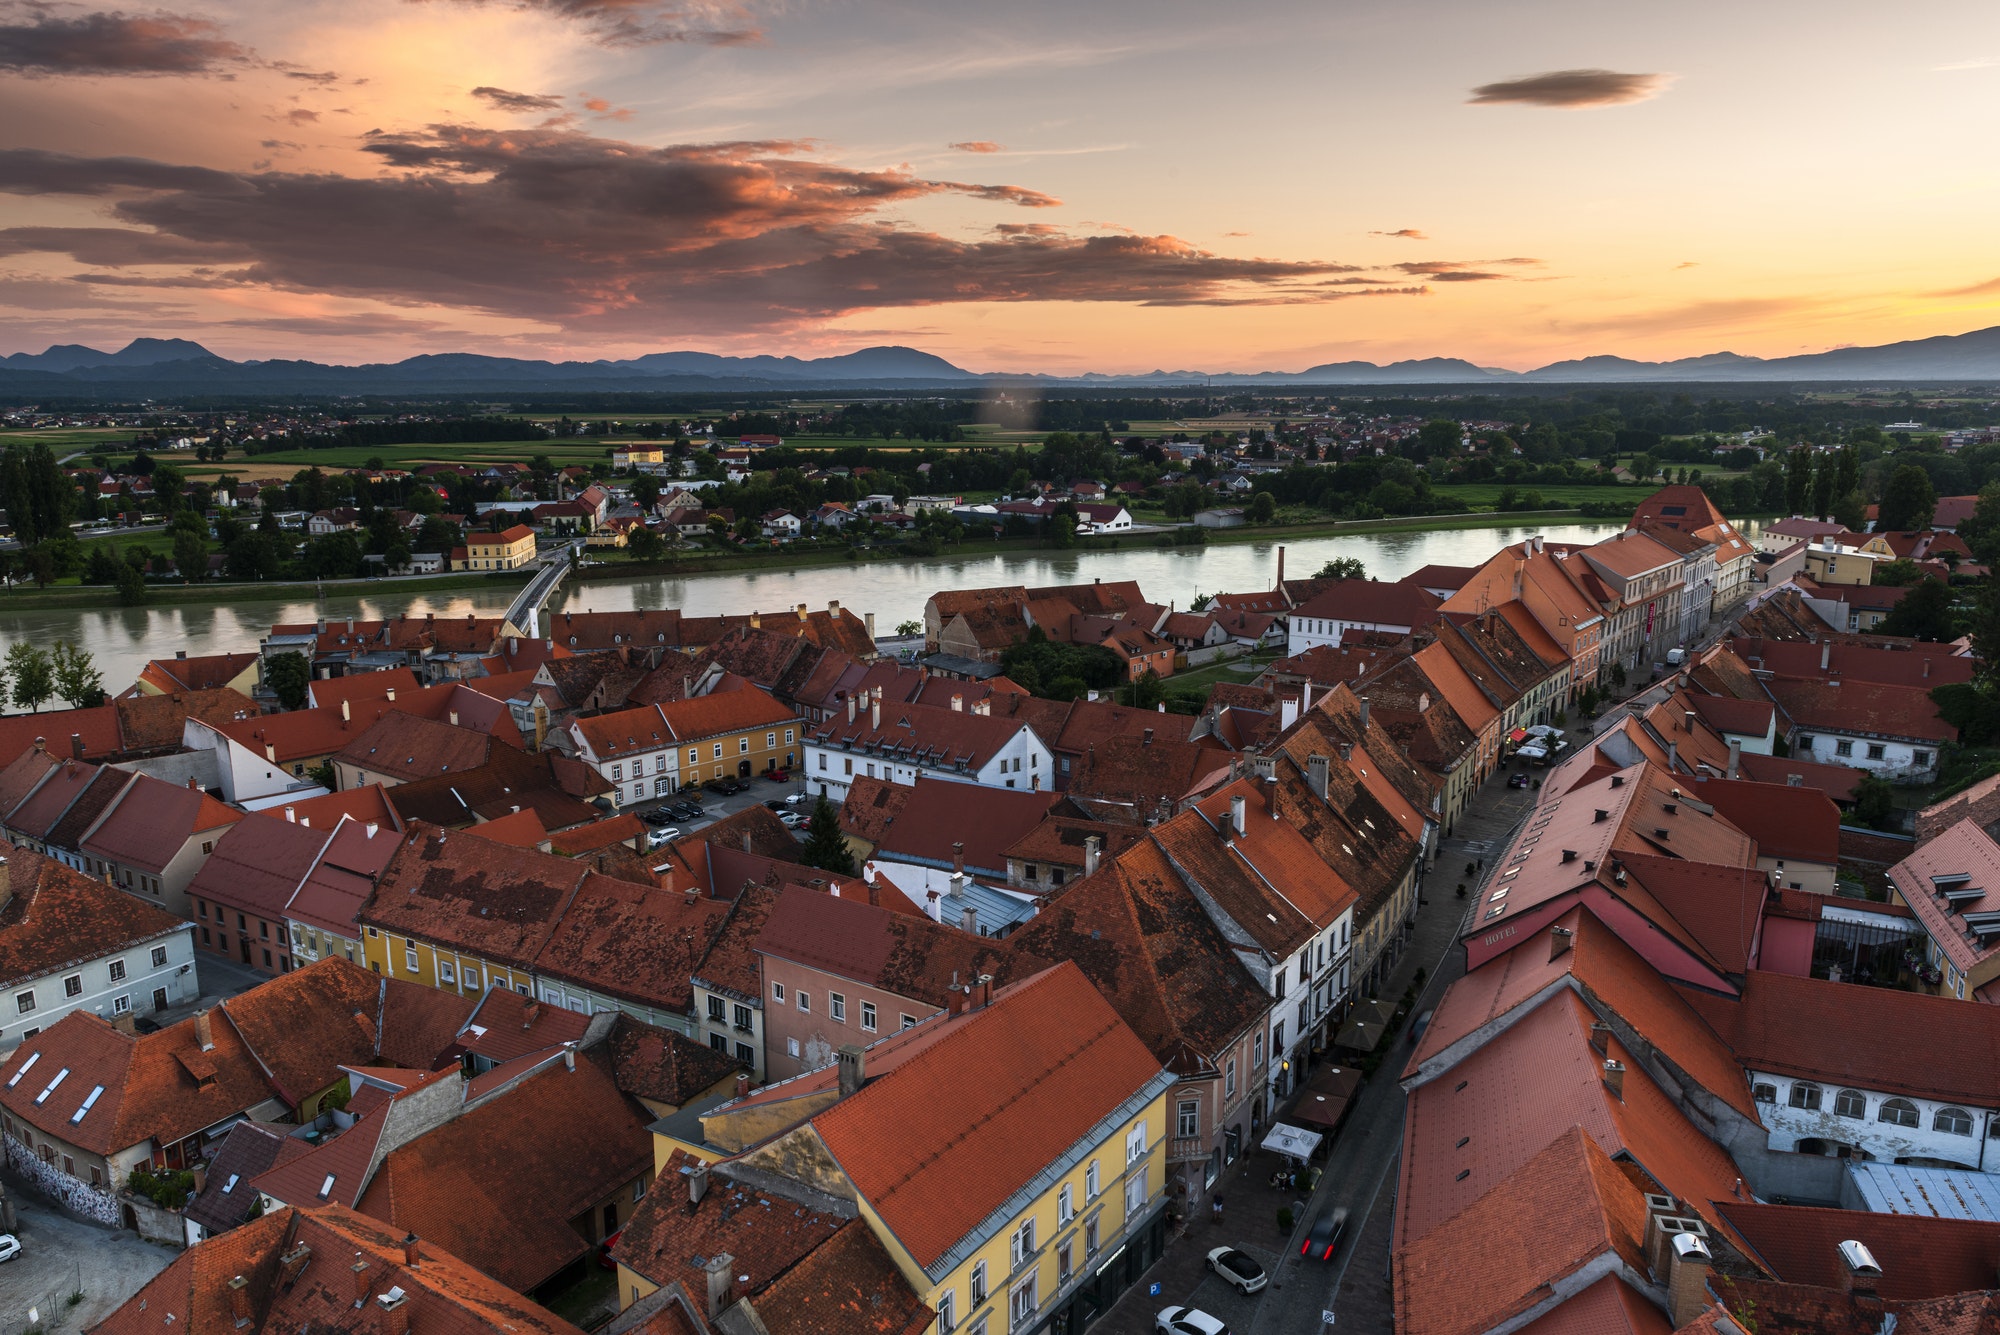 Cityscape of Ptuj in Slovenia at Sunset. River Drava and Roofs in Slovenia